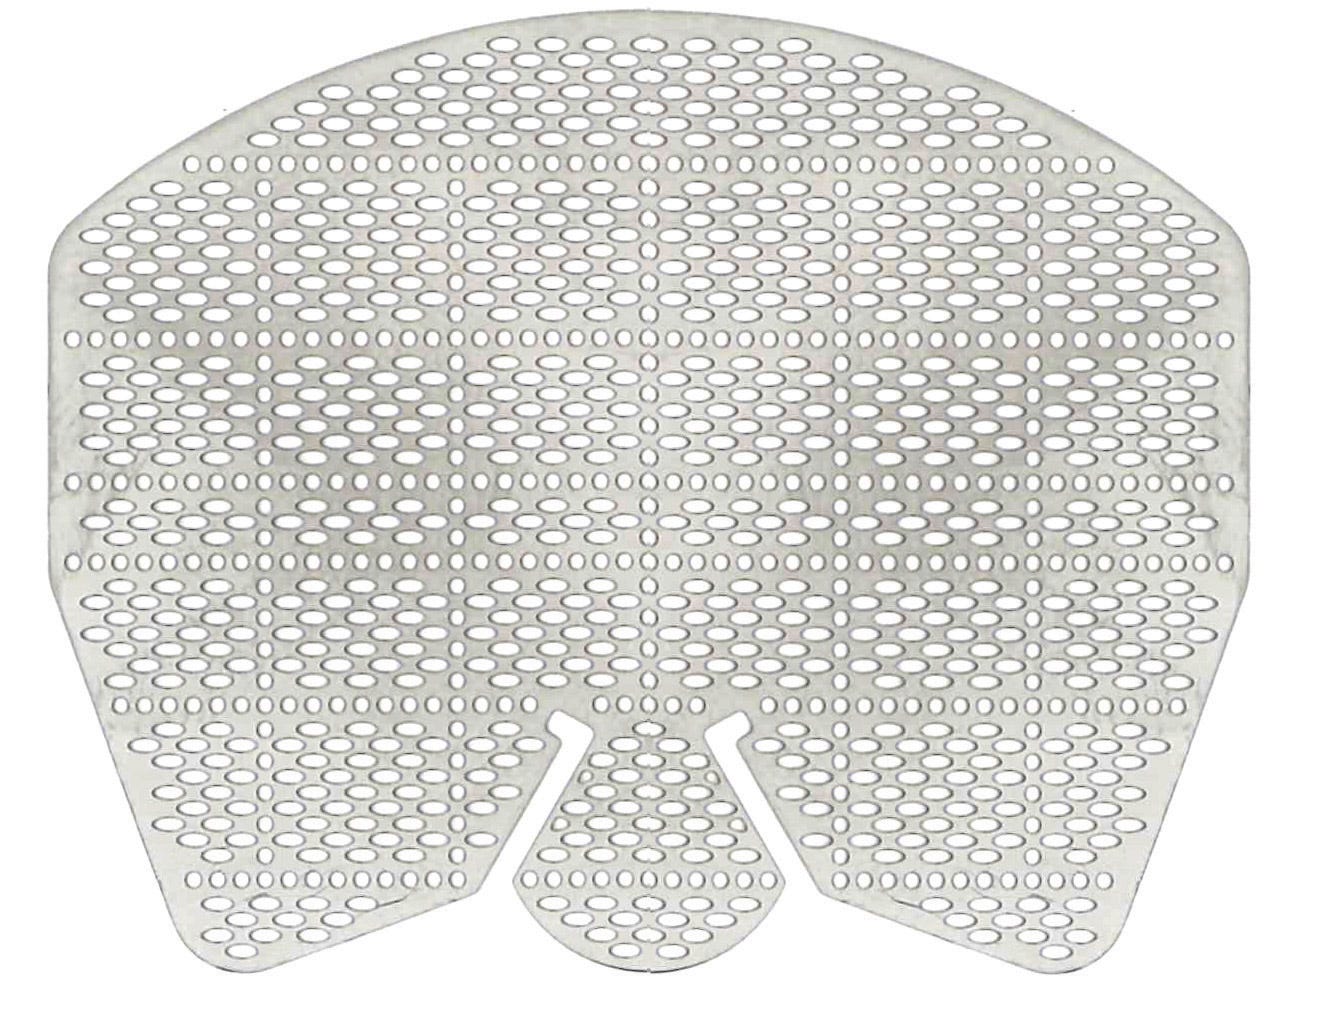 Titanium Single Butterfly Tenting Mesh - 40x50mm, .25mm Thick, Non Sterile